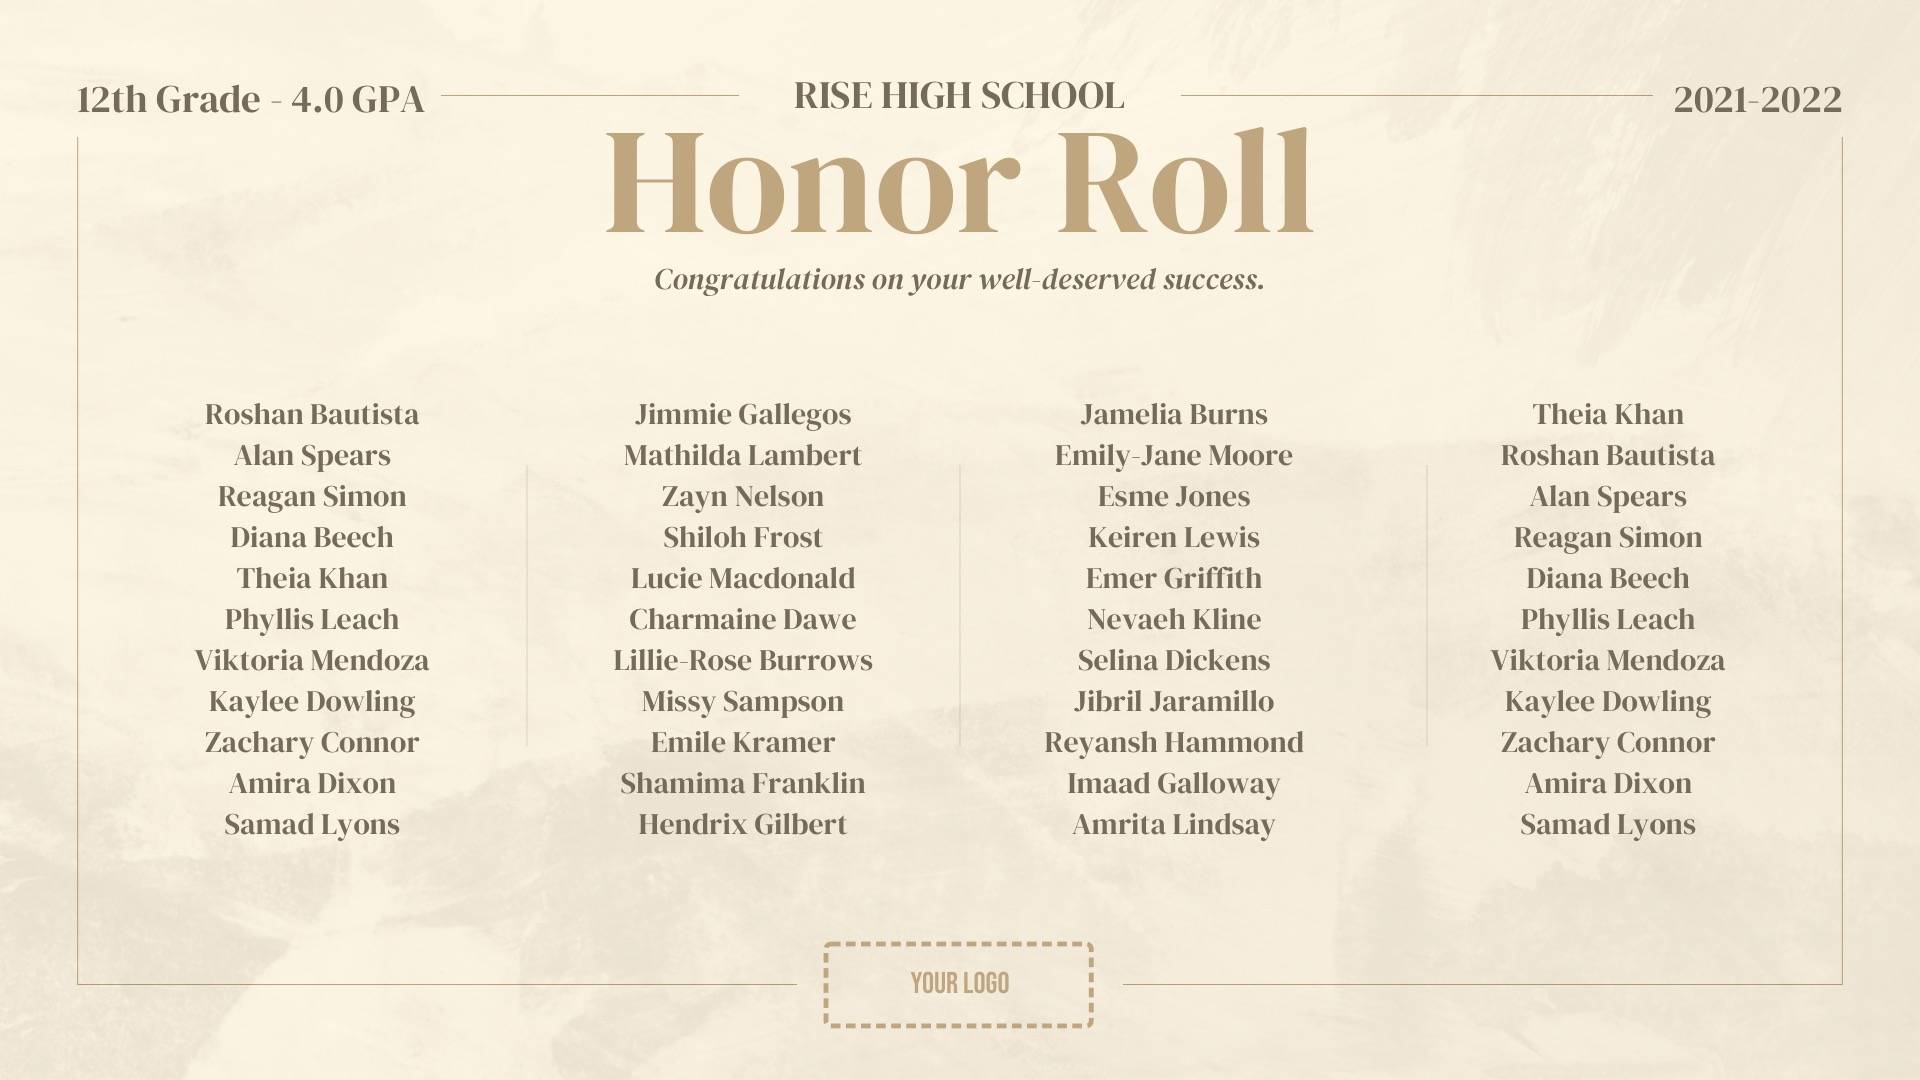 Honor Roll Digital Signage Template